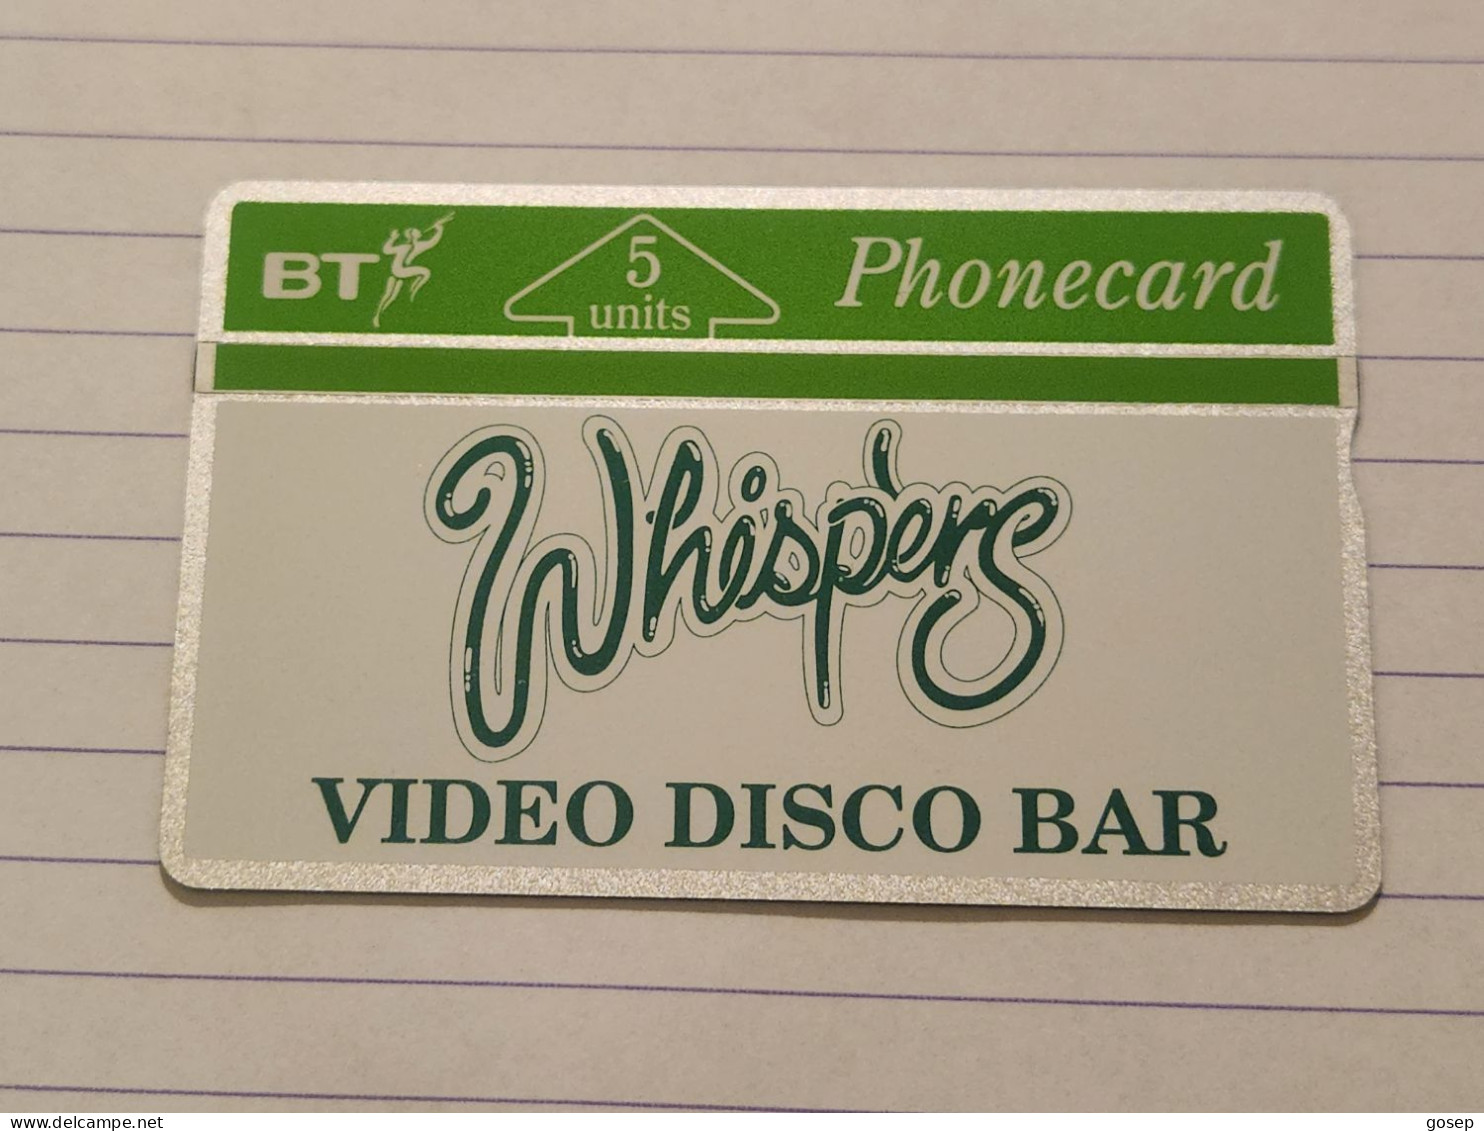 United Kingdom-(BTG-024)-whispers Video Disco Bar-(37)(5units)(201H10282)(tirage-500)(price Cataloge-8.00£mint) - BT General Issues